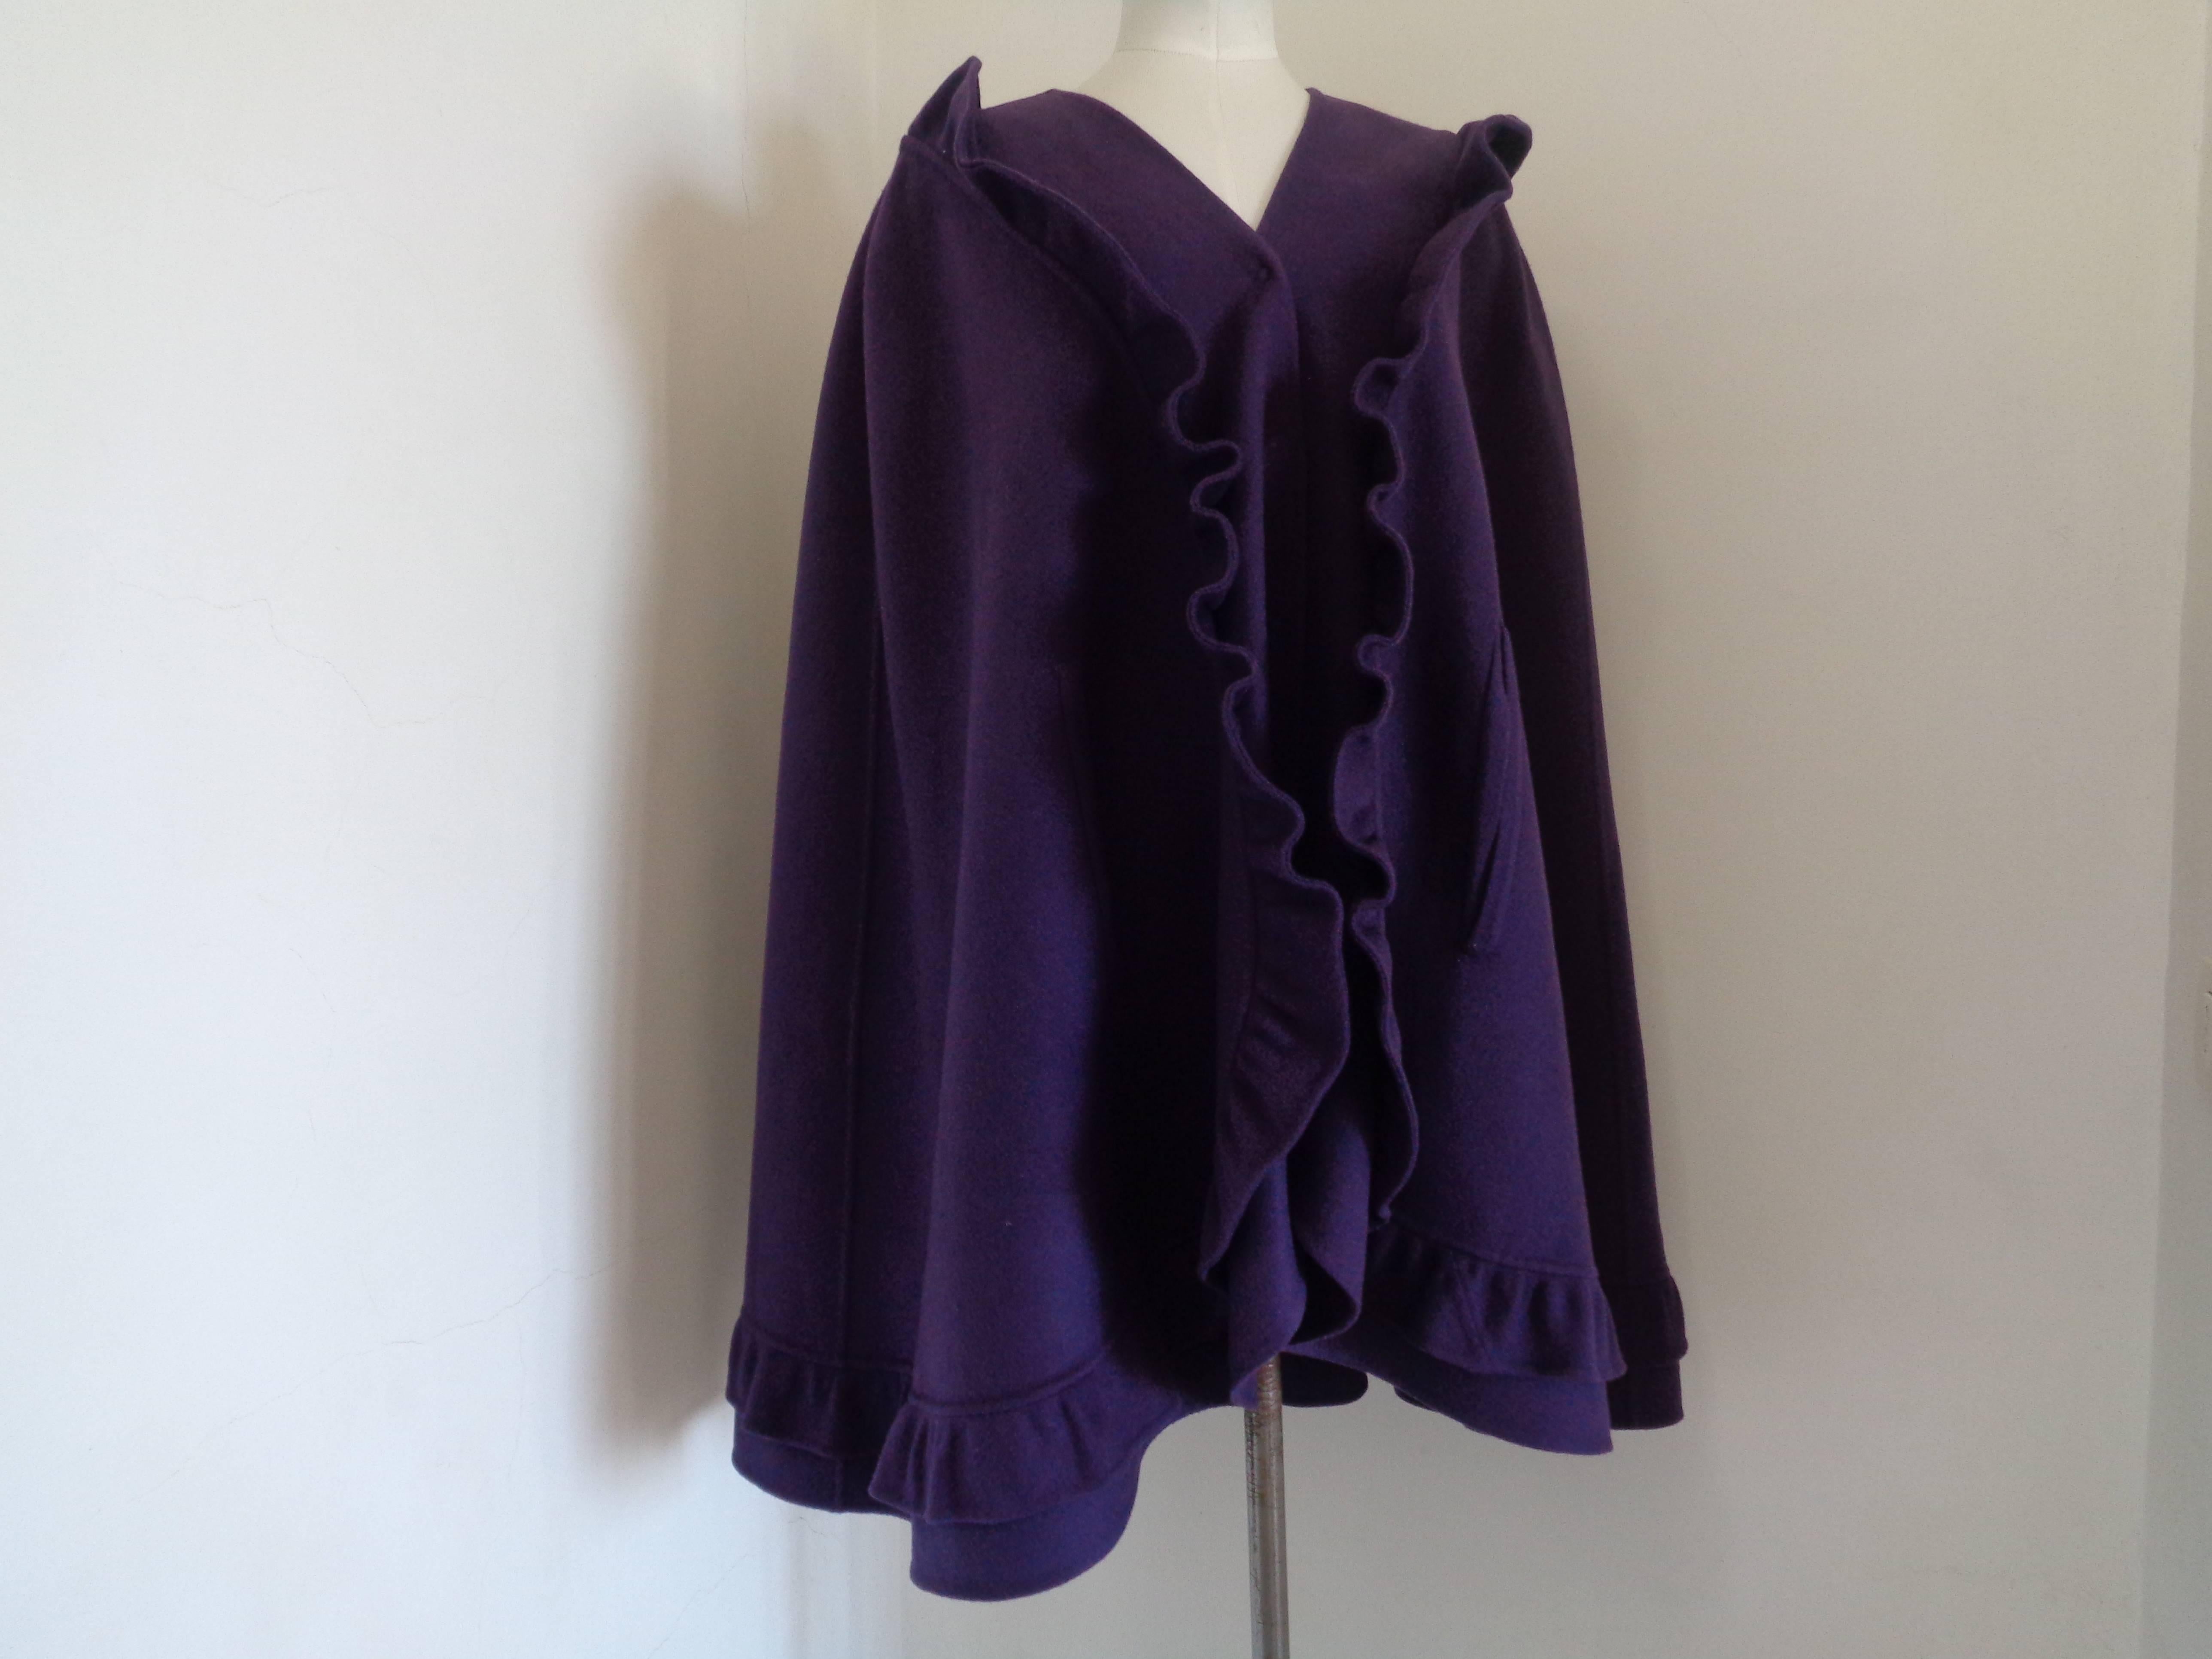 Mila Schon Purple Wool Cape

Totally made in italy in italian size range 44

Composition: 100% Wool